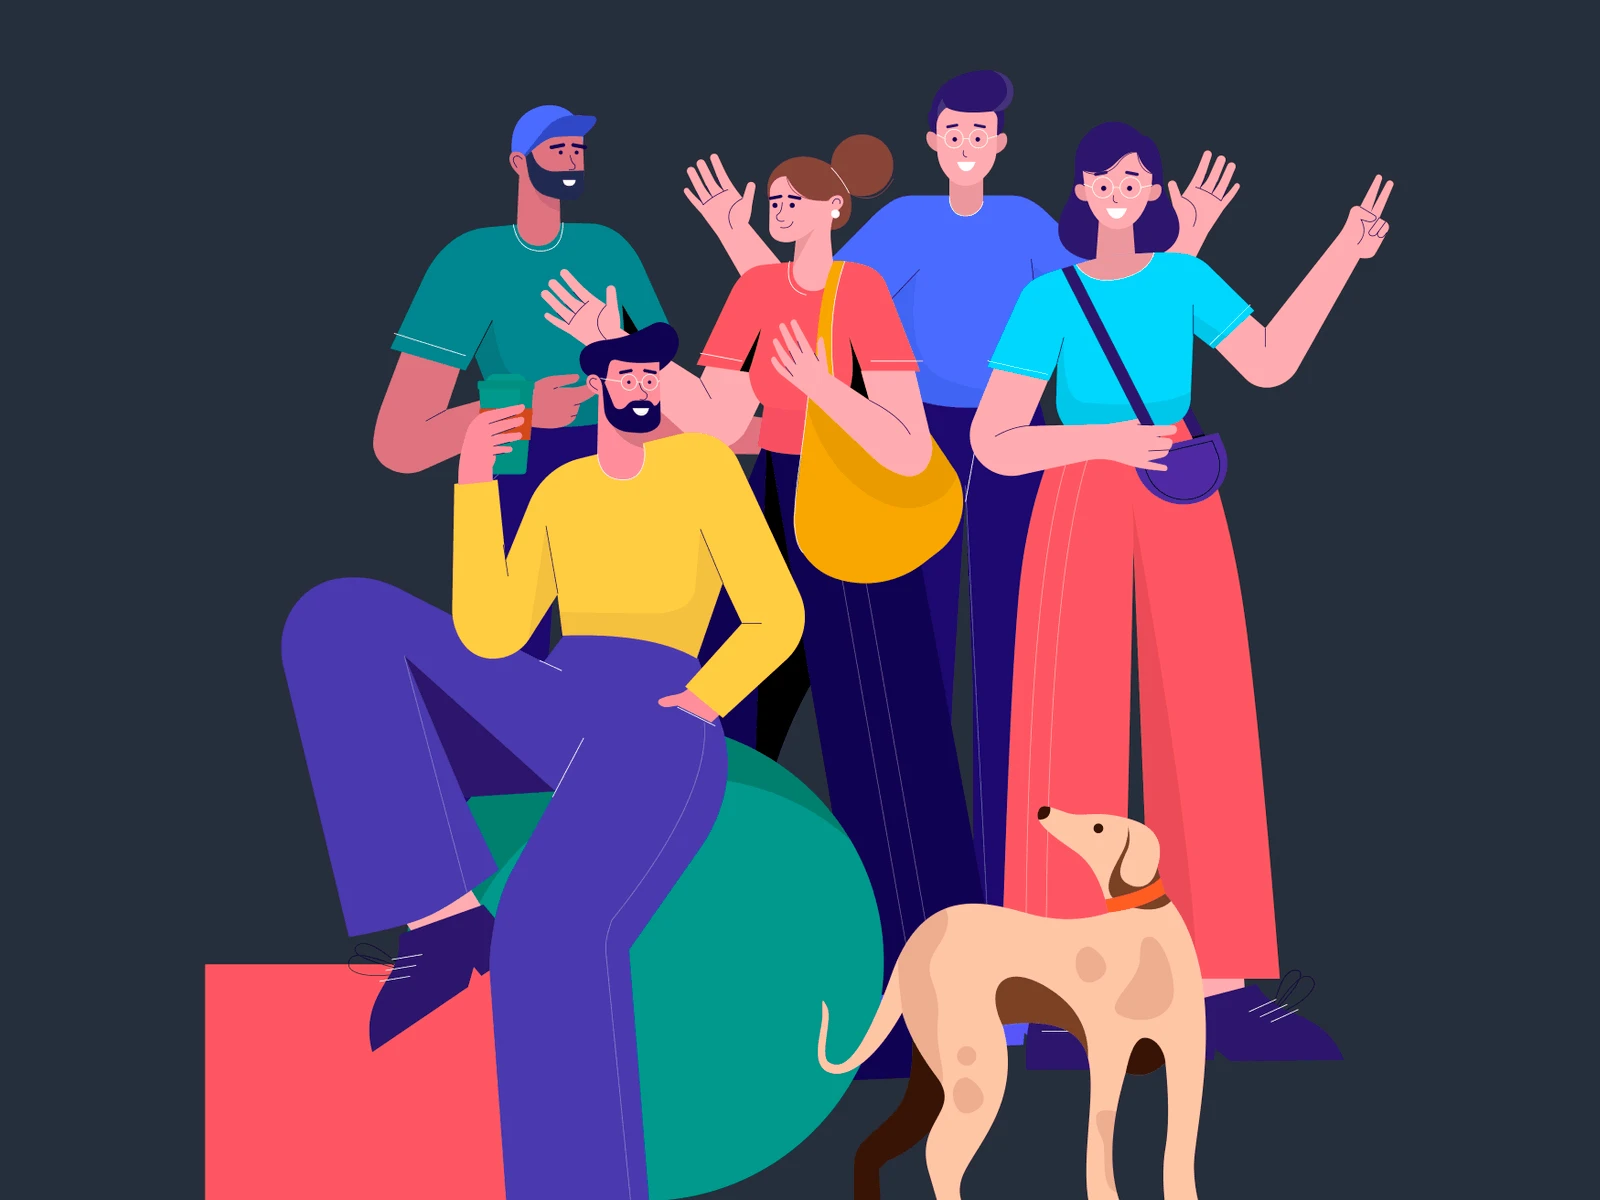 Lifestyle Free Illustrations - 12 colorful vector illustrations about lifestyle. Saving you time as a designer and money as a startup owner or an entrepreneur.